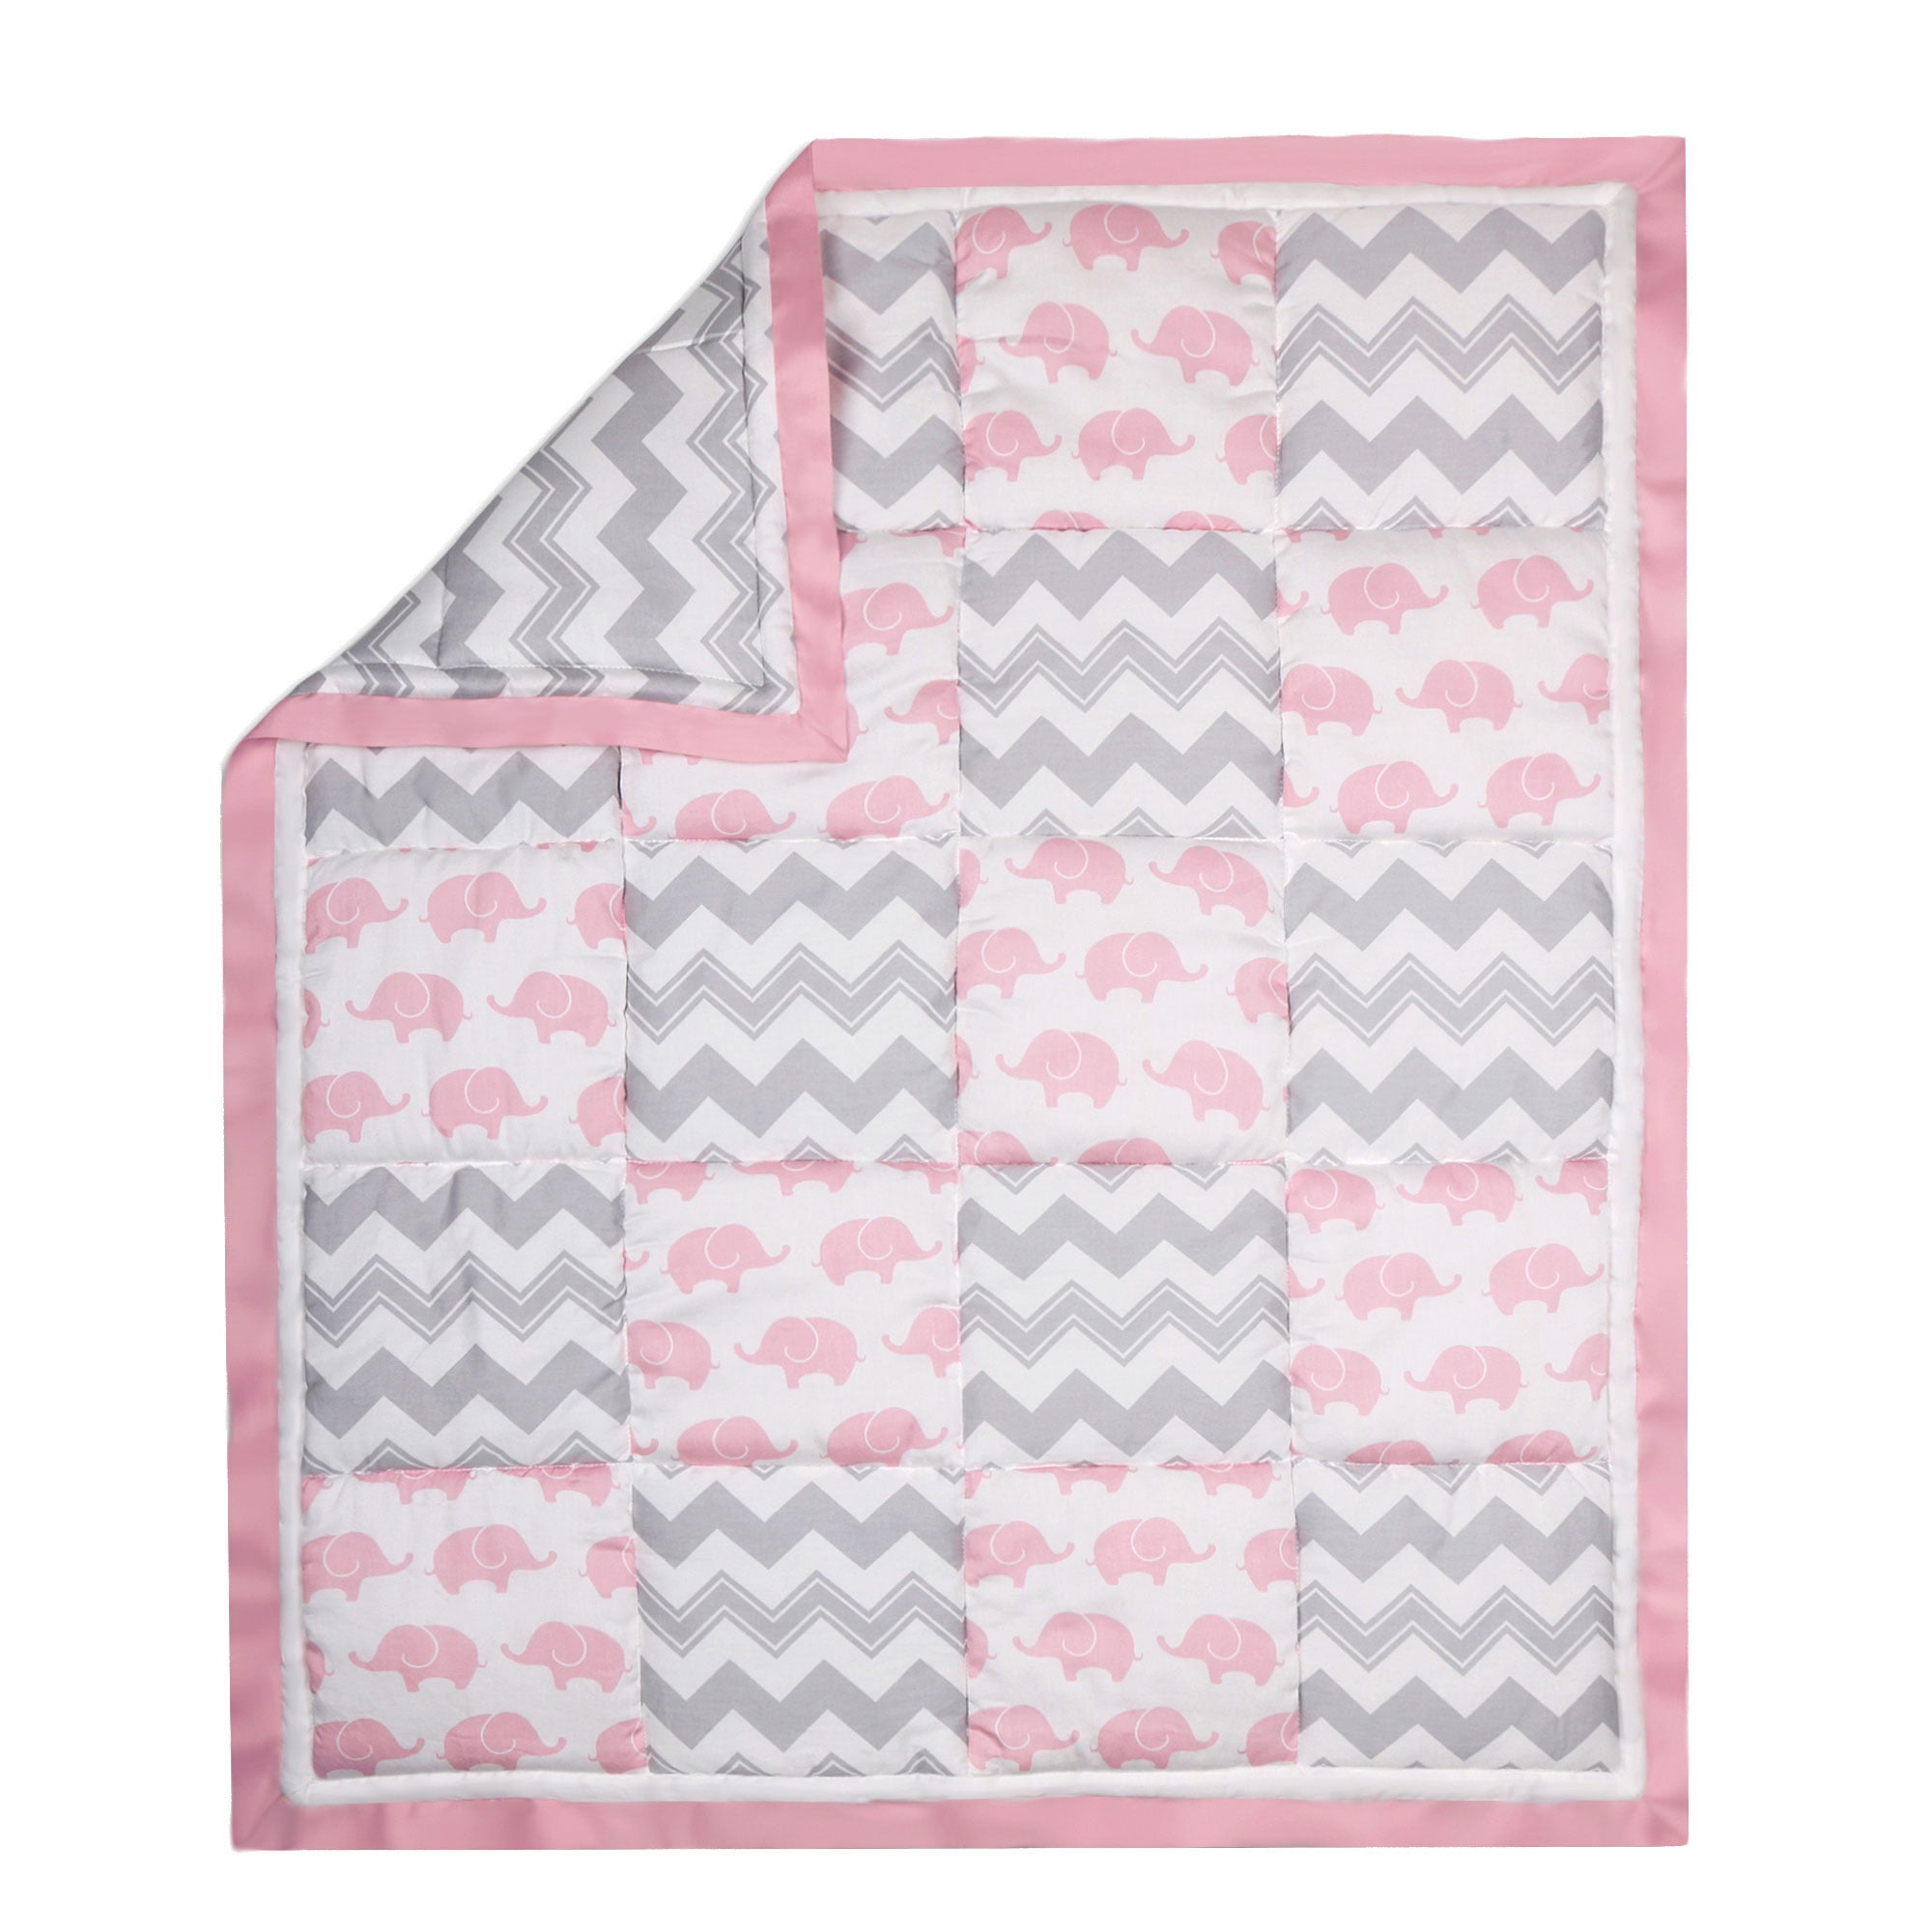 The Peanut Shell Baby Crib Quilt Grey and Pink Elephant and Zig Zag Prints 100 Cotton